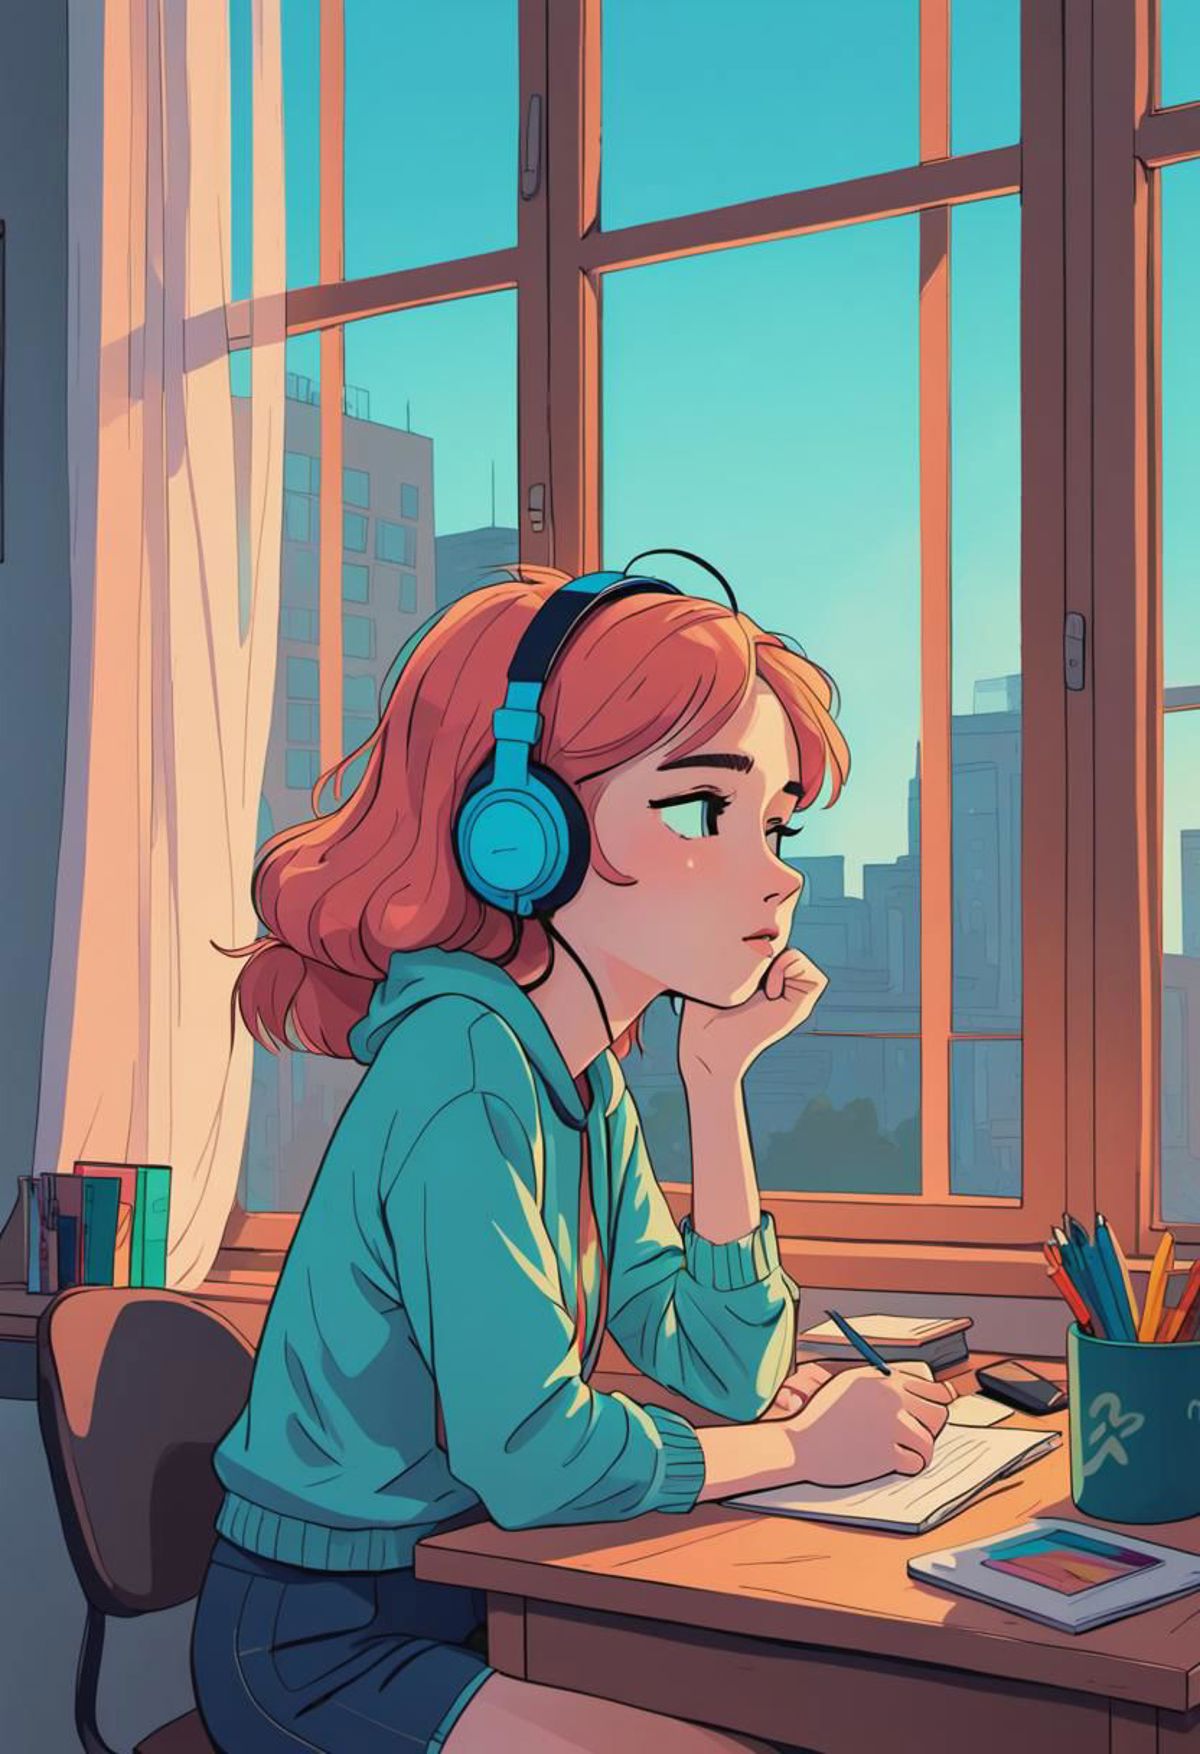 a bored student girl sitting at her desk, headphones, large window, melancolic vibes, vibrant colors, lineart